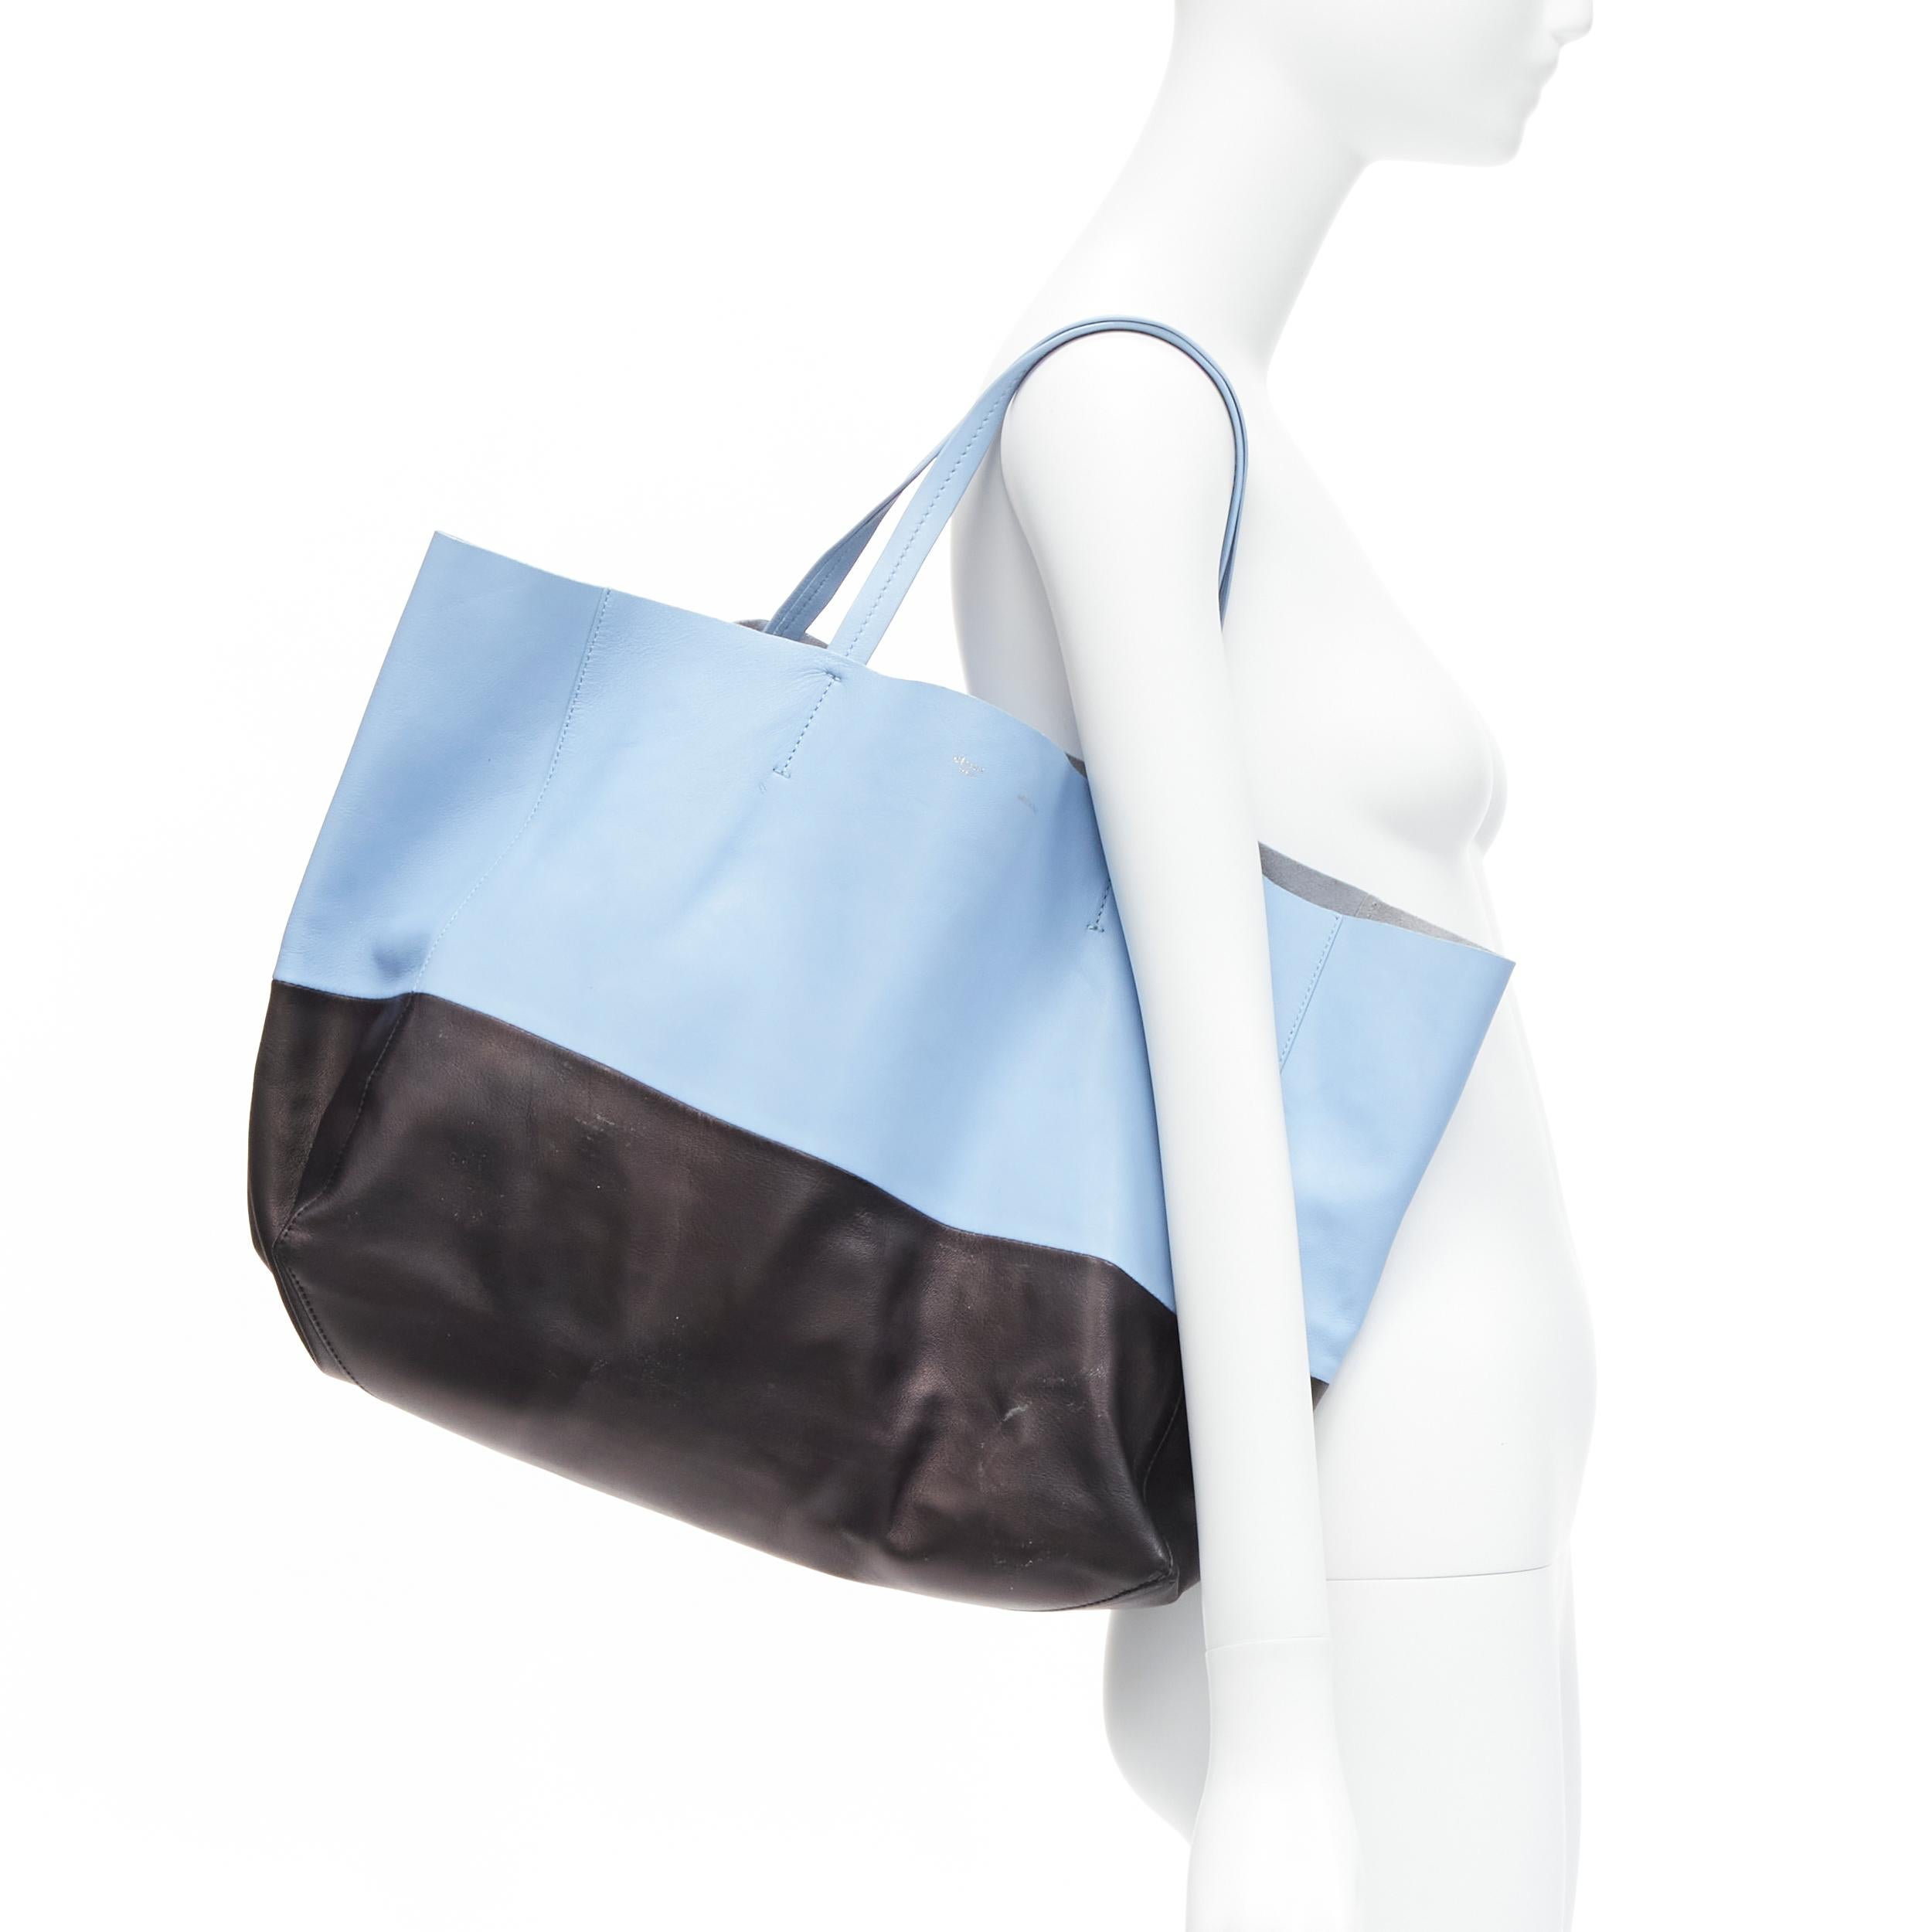 CELINE Cabat baby blue black colorblock panels gold logo tote bag
Reference: LNKO/A02135
Brand: Celine
Designer: Phoebe Philo
Model: Cabat
Material: Leather
Color: Blue, Black
Pattern: Solid
Lining: Blue Leather
Made in: Italy

CONDITION:
Condition: